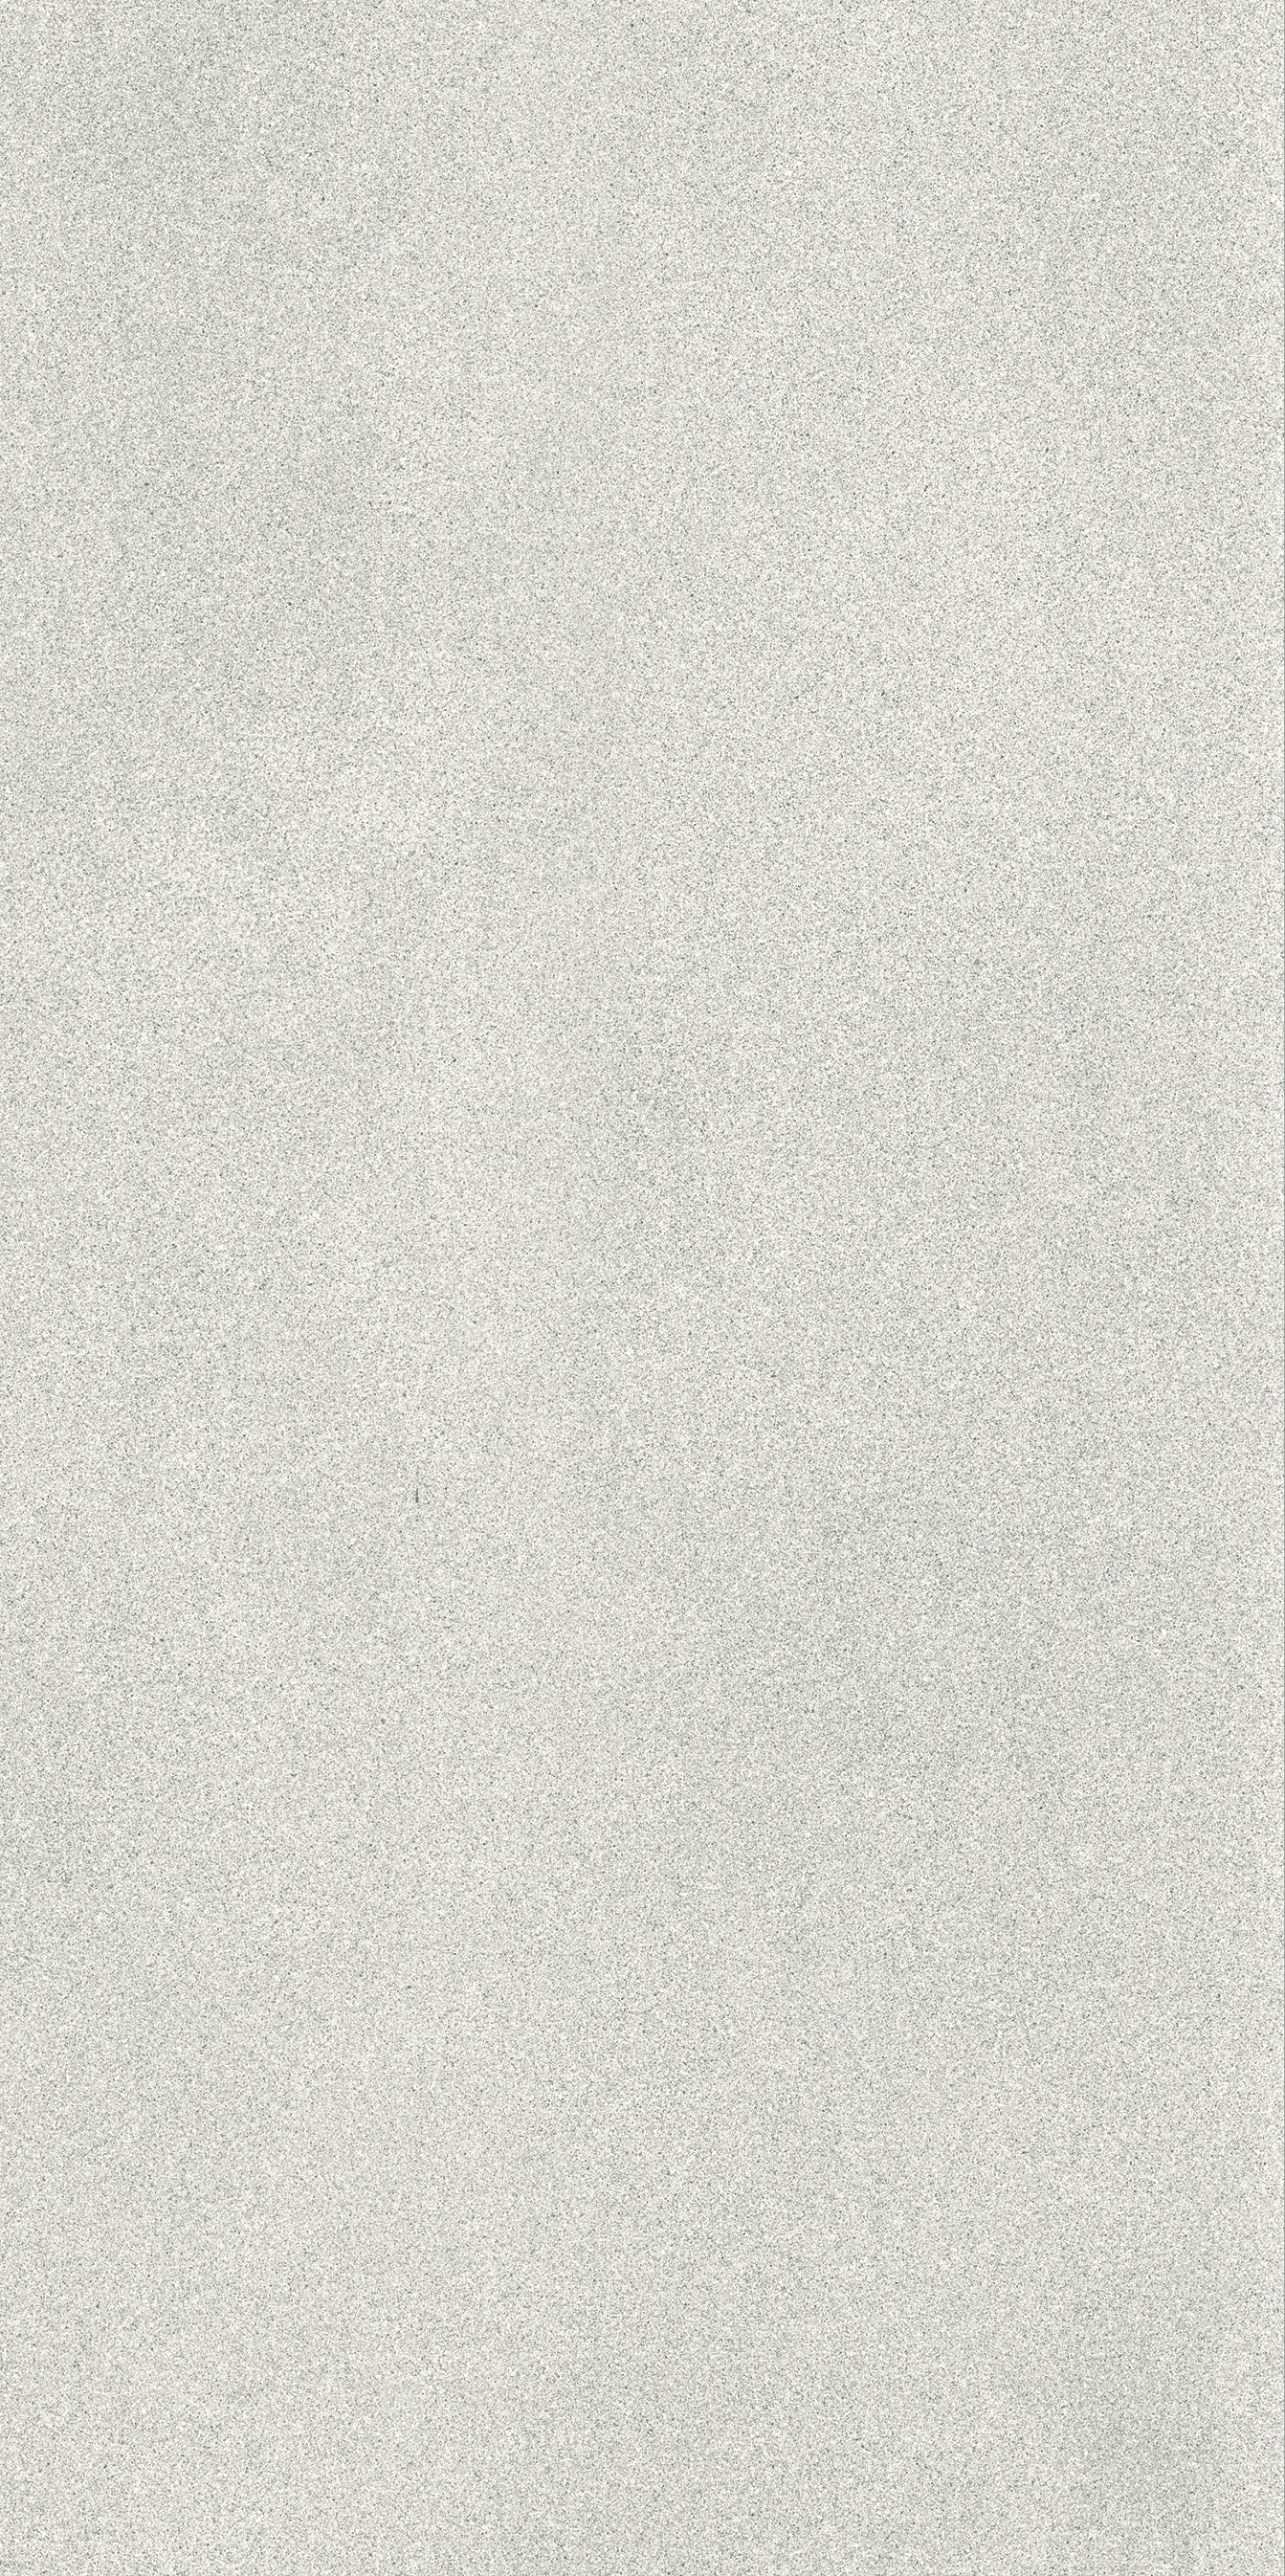 landmark 9mm masterplan white avenue field tile 24x48x9mm matte rectified porcelain tile distributed by surface group international